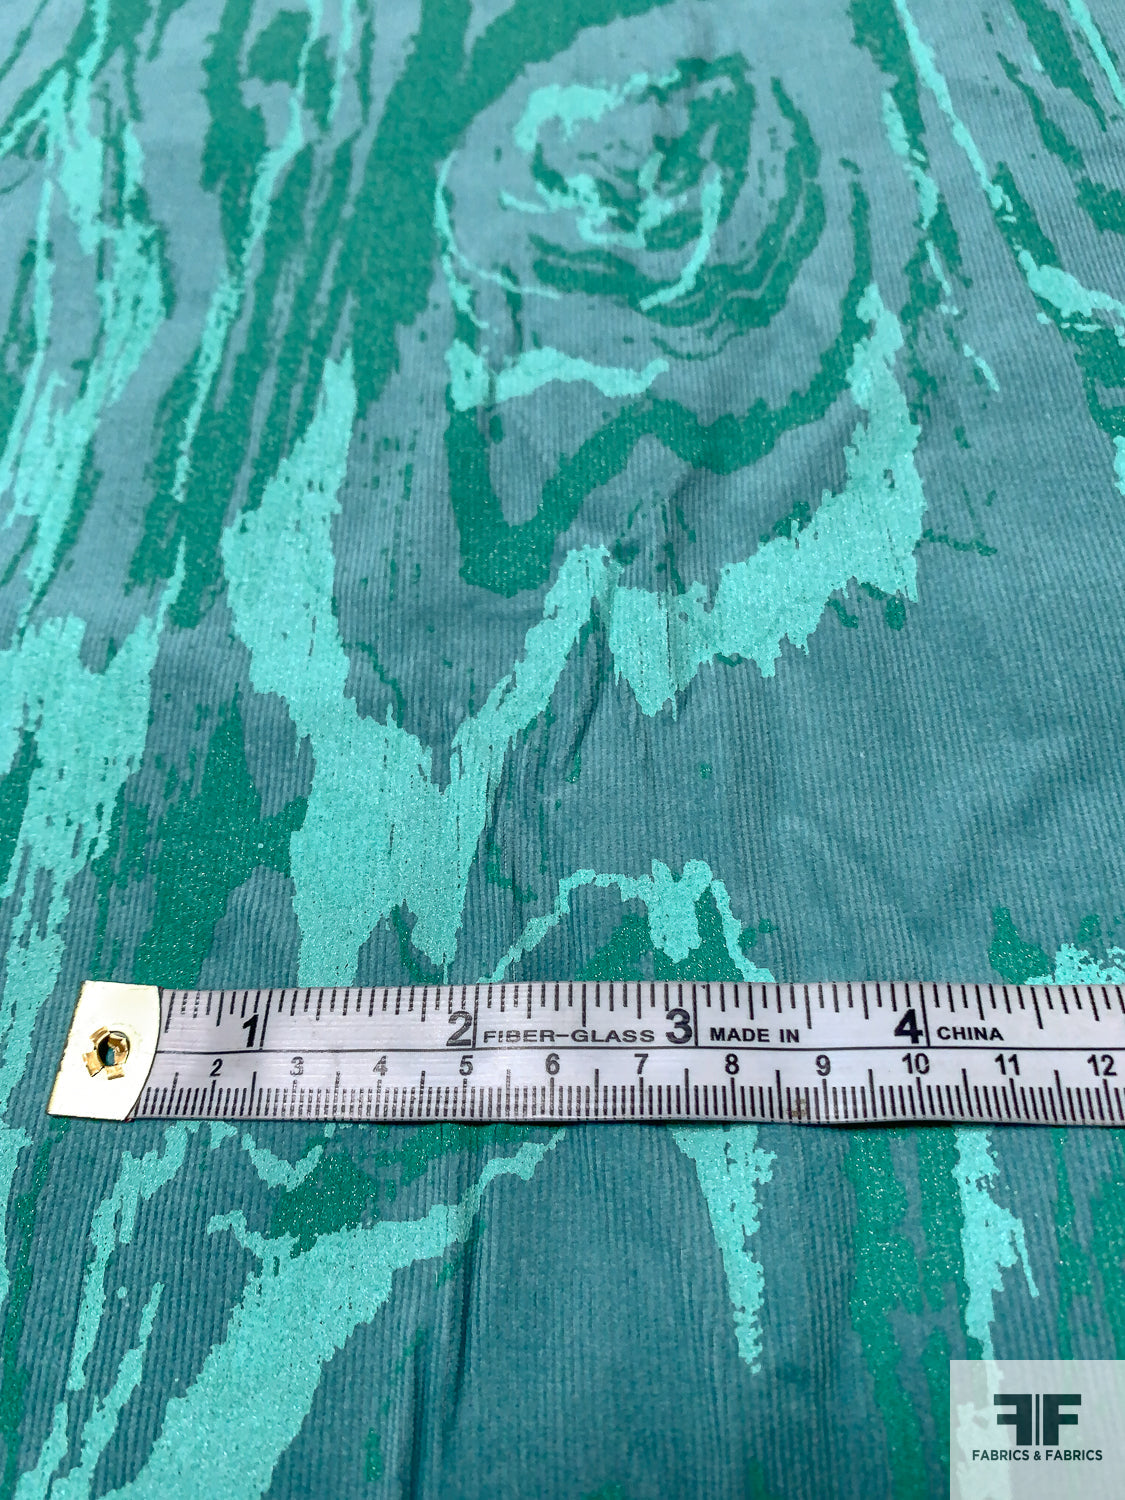 Wood Grain Printed Pinwale Stretch Cotton Corduroy with Glitter Detail - Ocean Greens